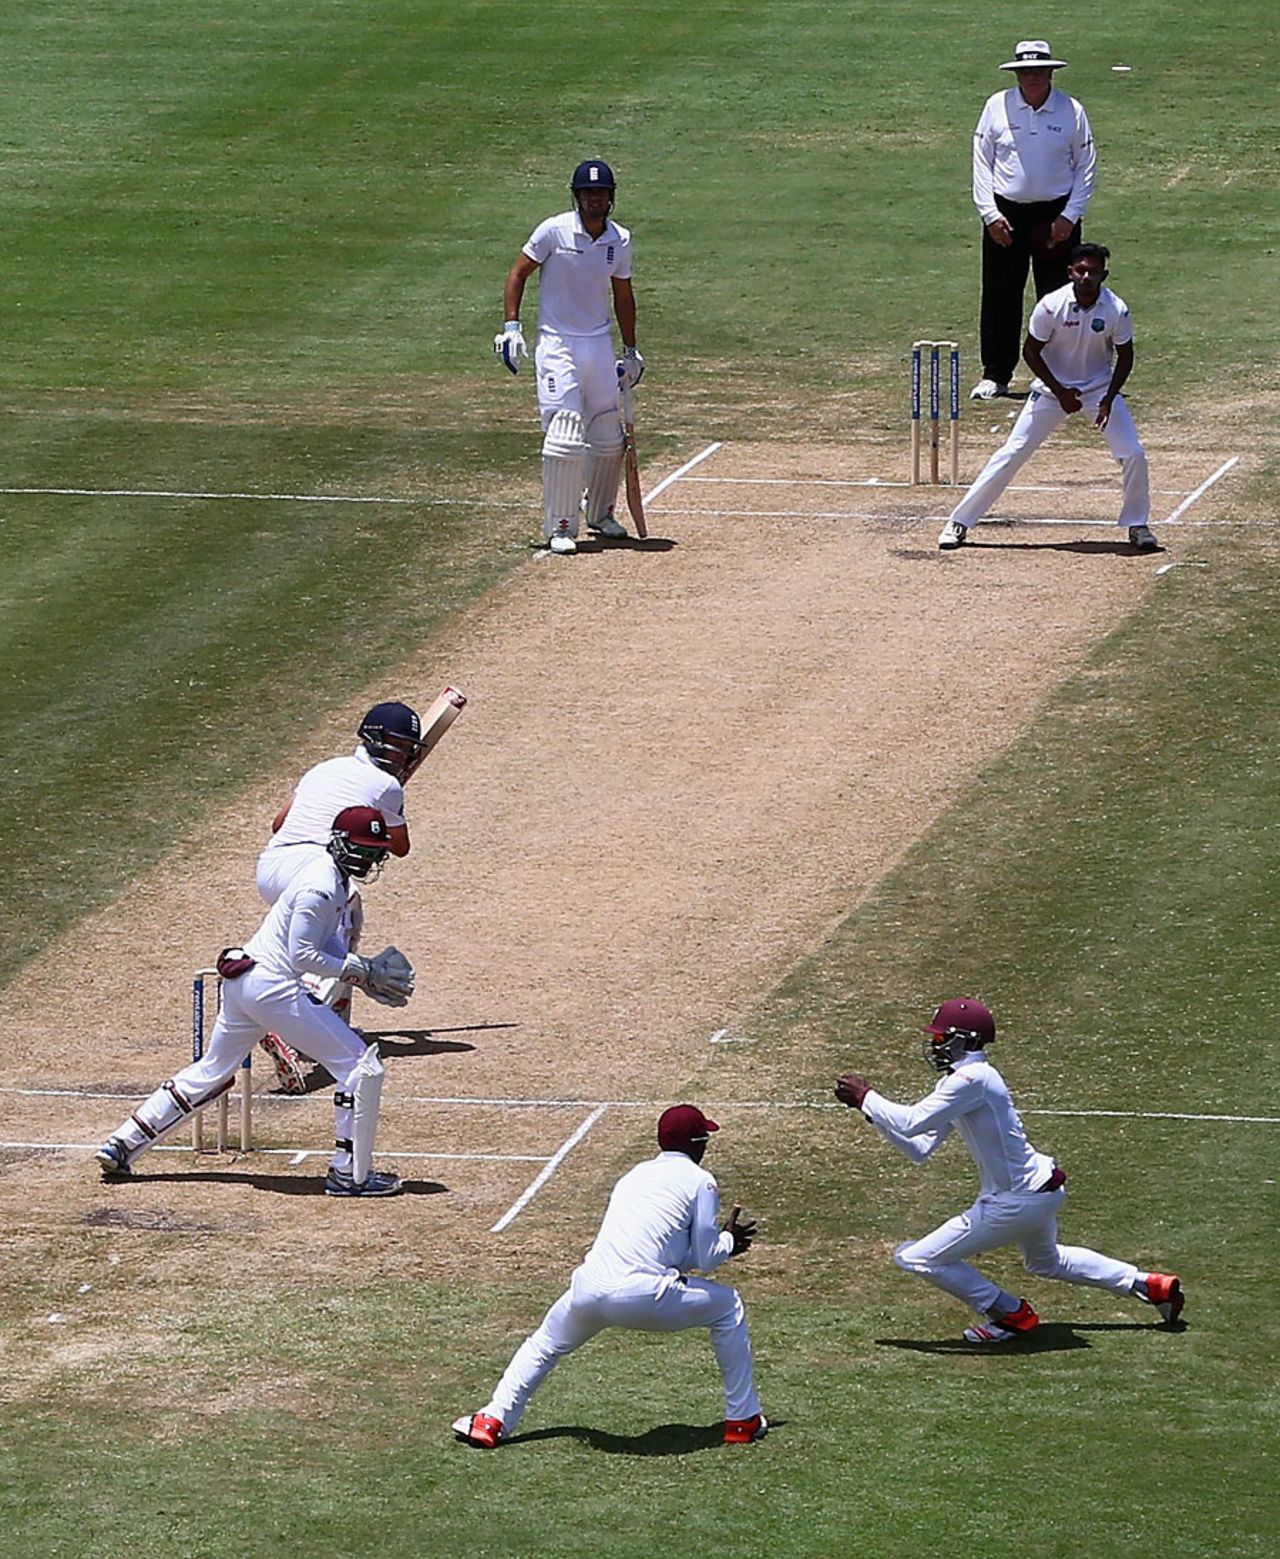 Jonathan Trott edged to second slip, West Indies v England, 2nd Test, St George's, 3rd day, April 23, 2015